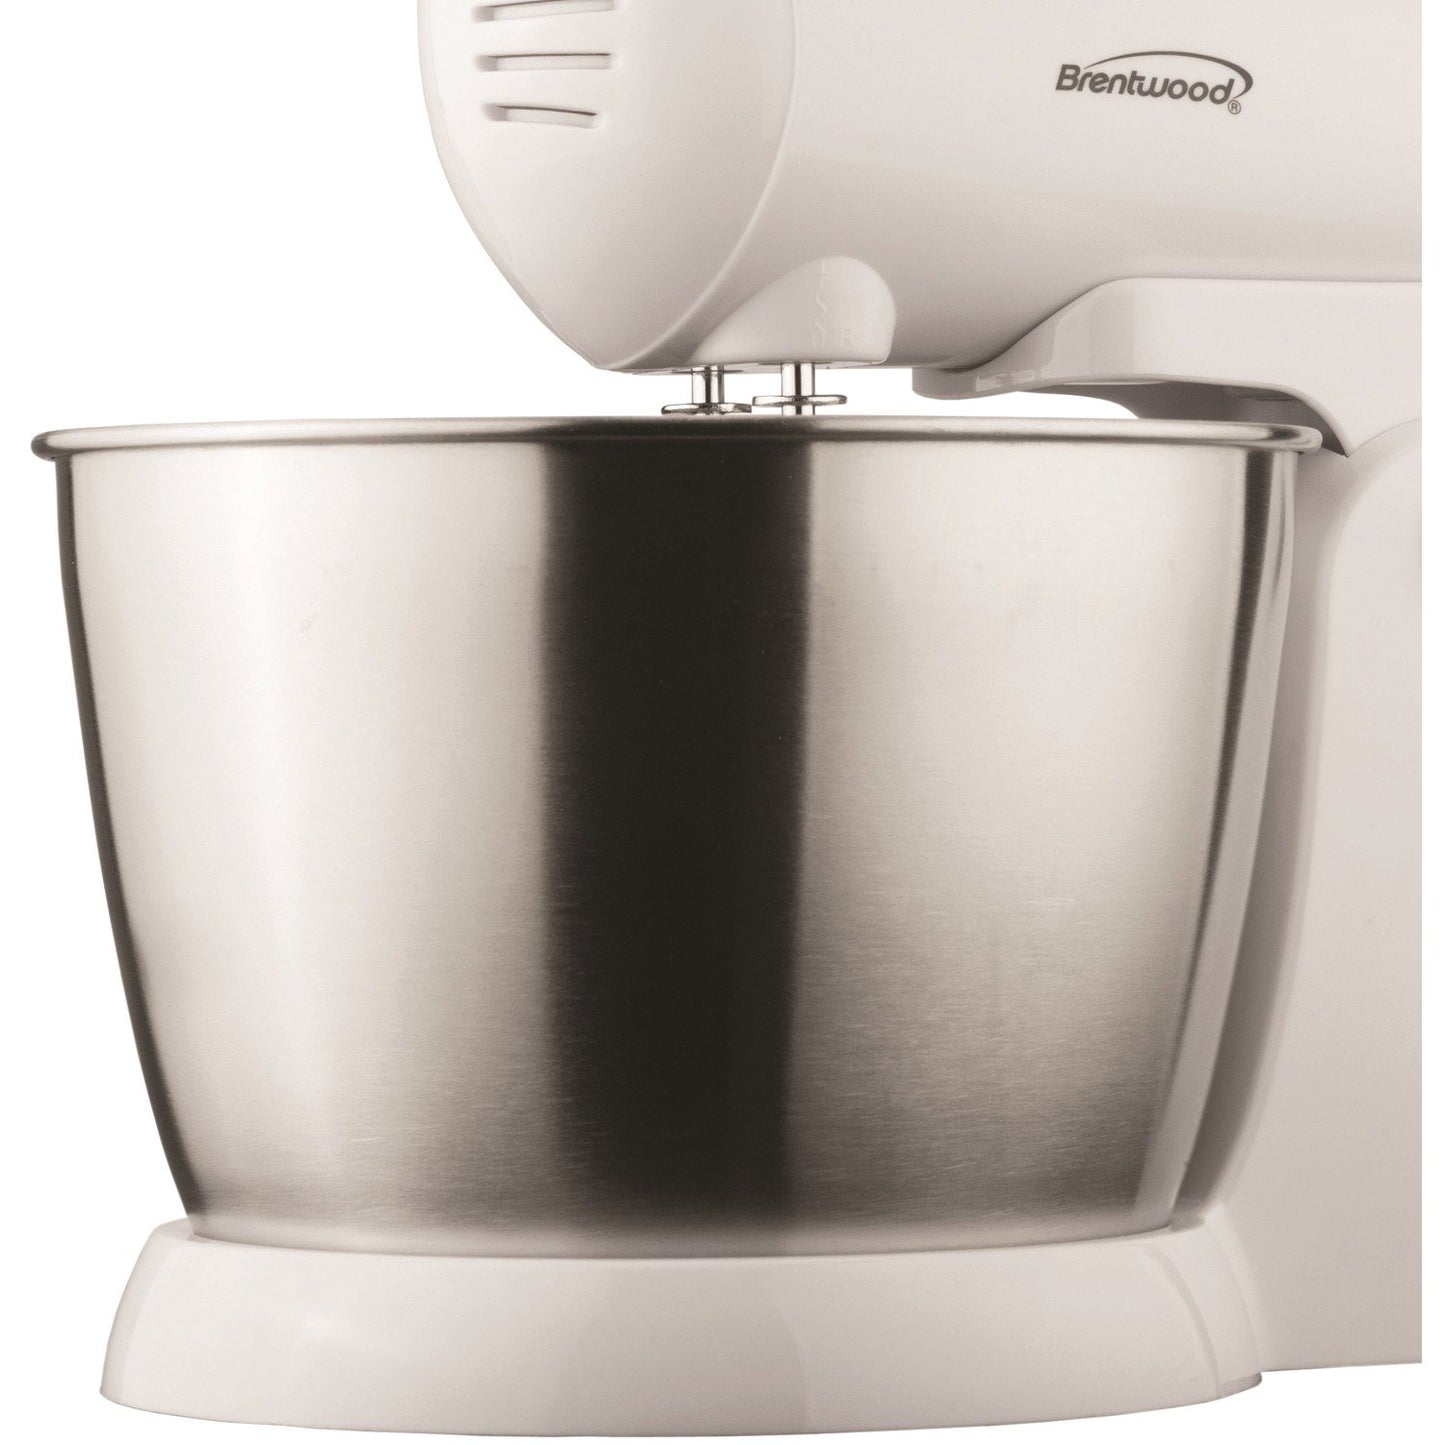 Brentwood Appl. SM-1152 5-Speed + Turbo Electric Stand Mixer w/Bowl (White)